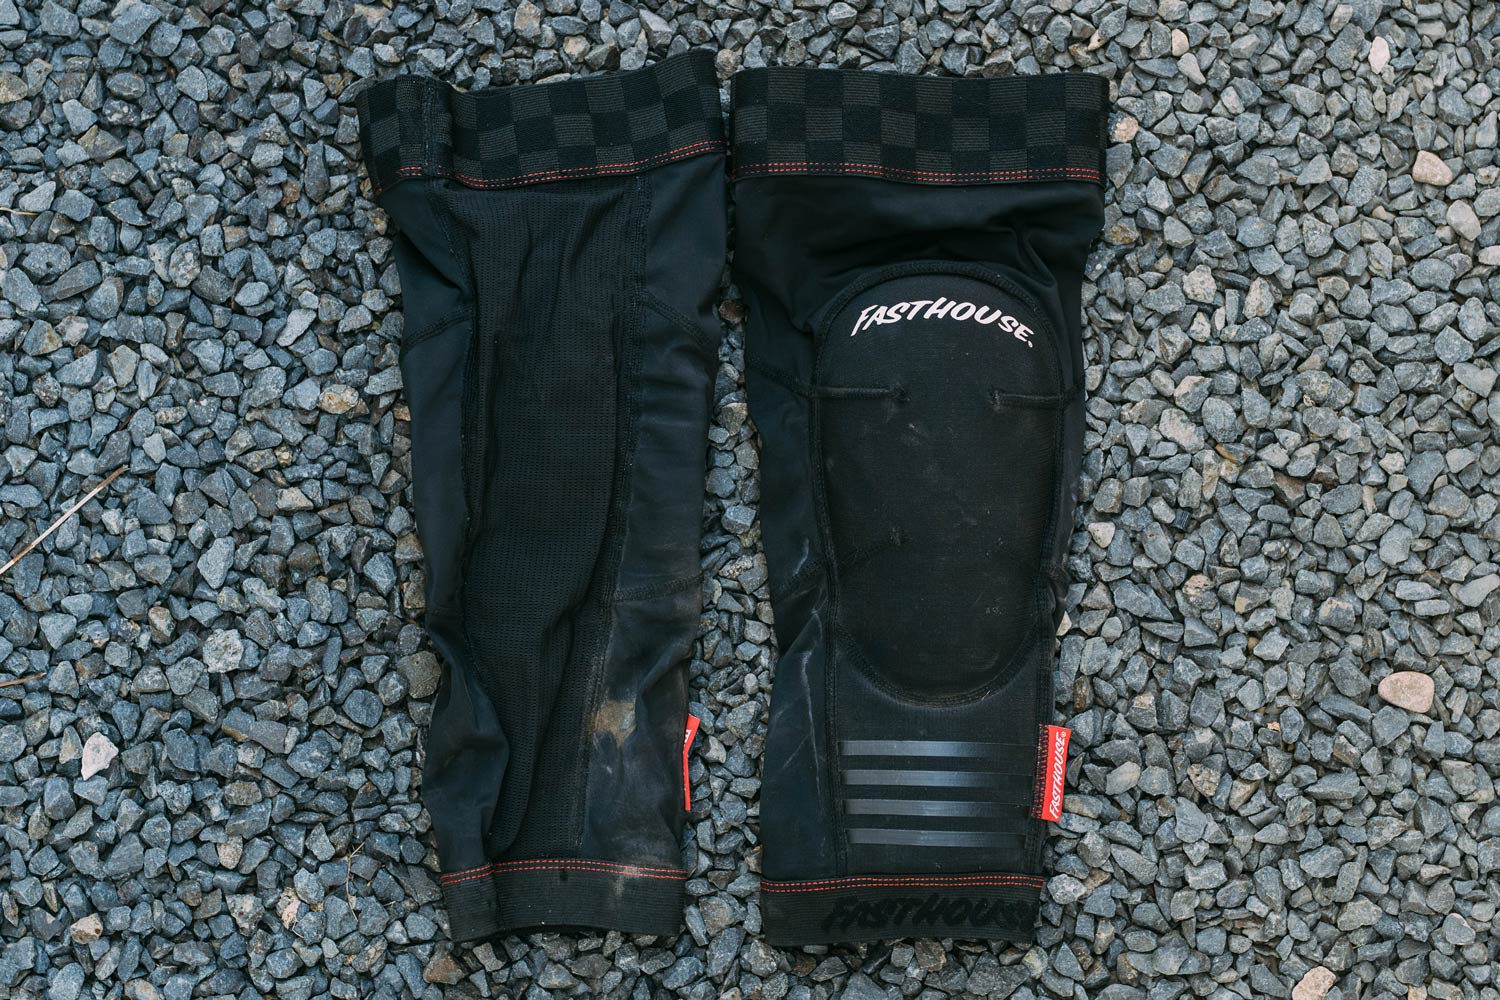 Review: Fasthouse Hooper Knee Pads